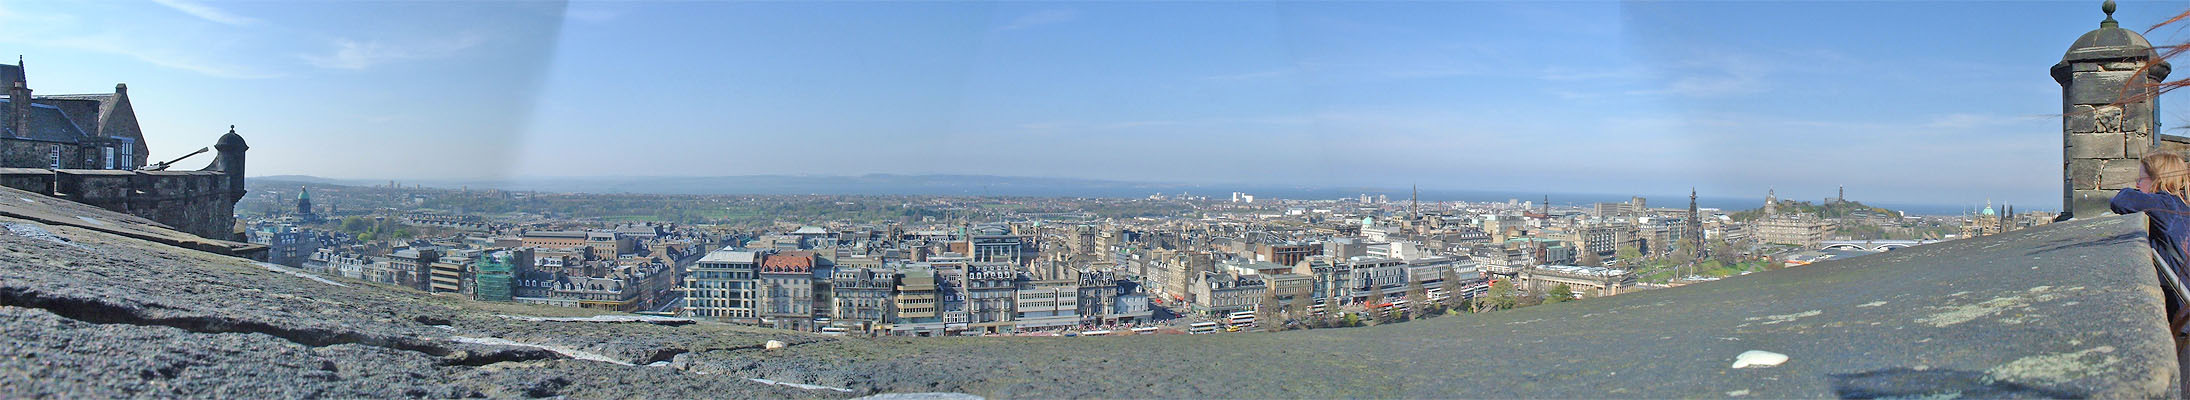 an image of The view from Edinburgh Castle